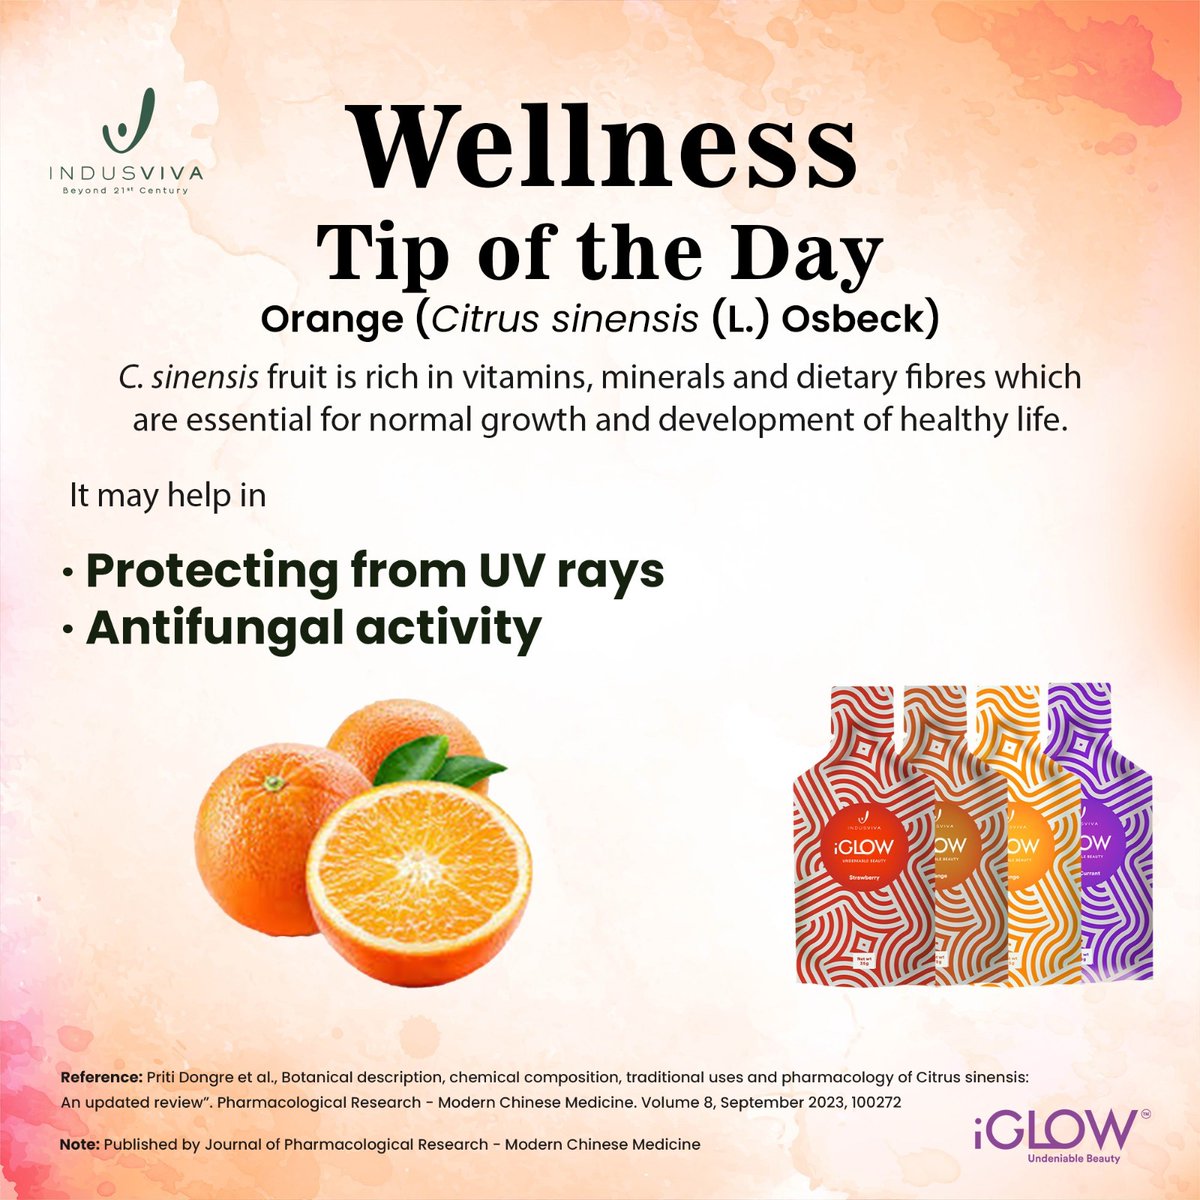 Experience the radiance of healthy skin from within with iGlow.
Visit Website: vivaiglow.com
#skin #skincare #beauty #antiaging #glowingskin #healthyskin #naturalskincare #glow #skinhealth #naturalbeauty #vivaiglow #indusviva #vibrantviva